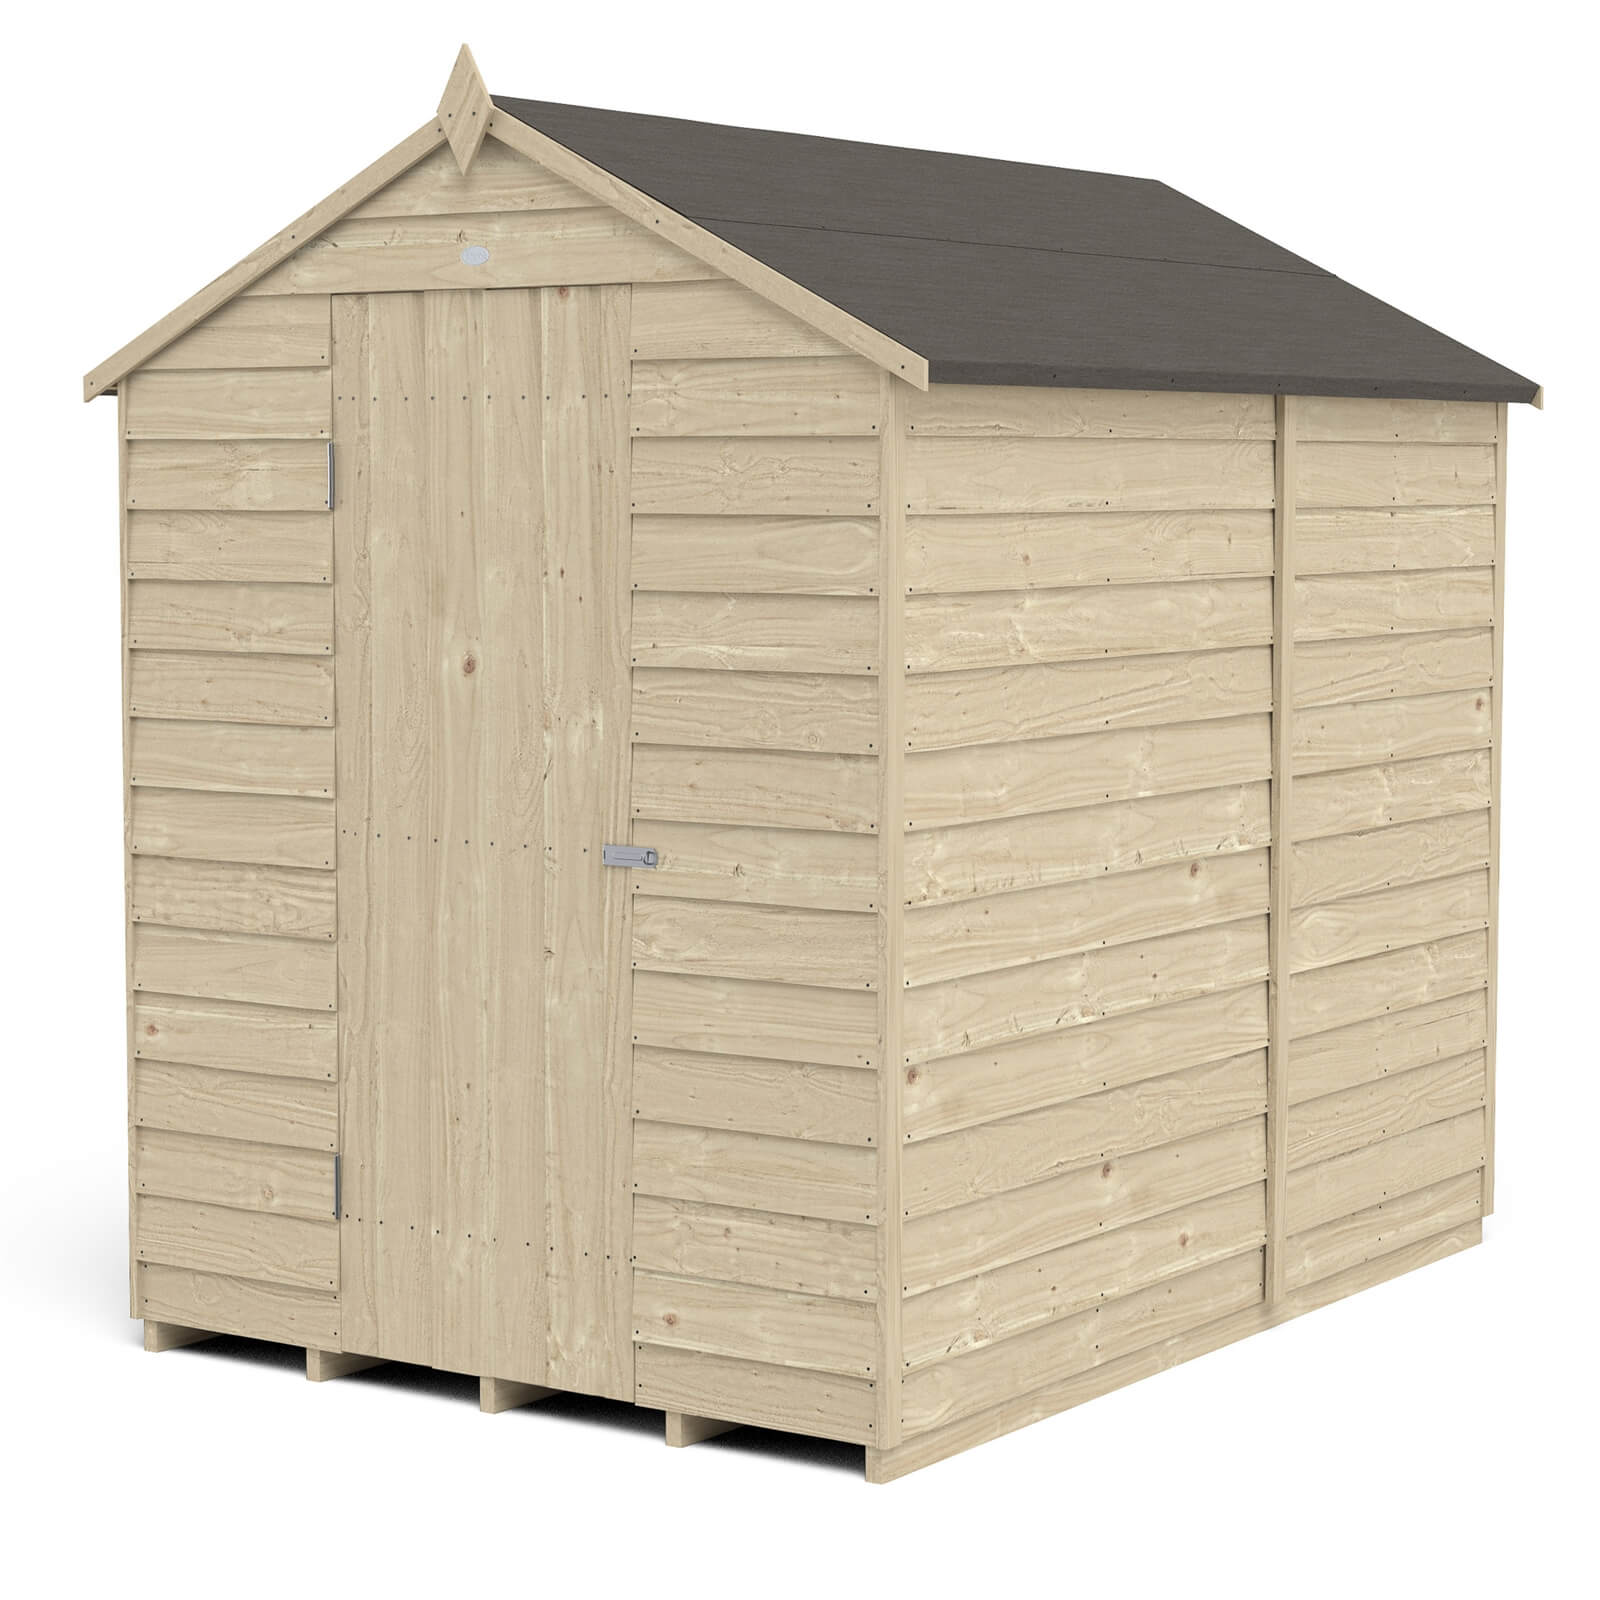 Forest 7 x 5ft Overlap Pressure Treated 7x5 Apex Shed - No Window